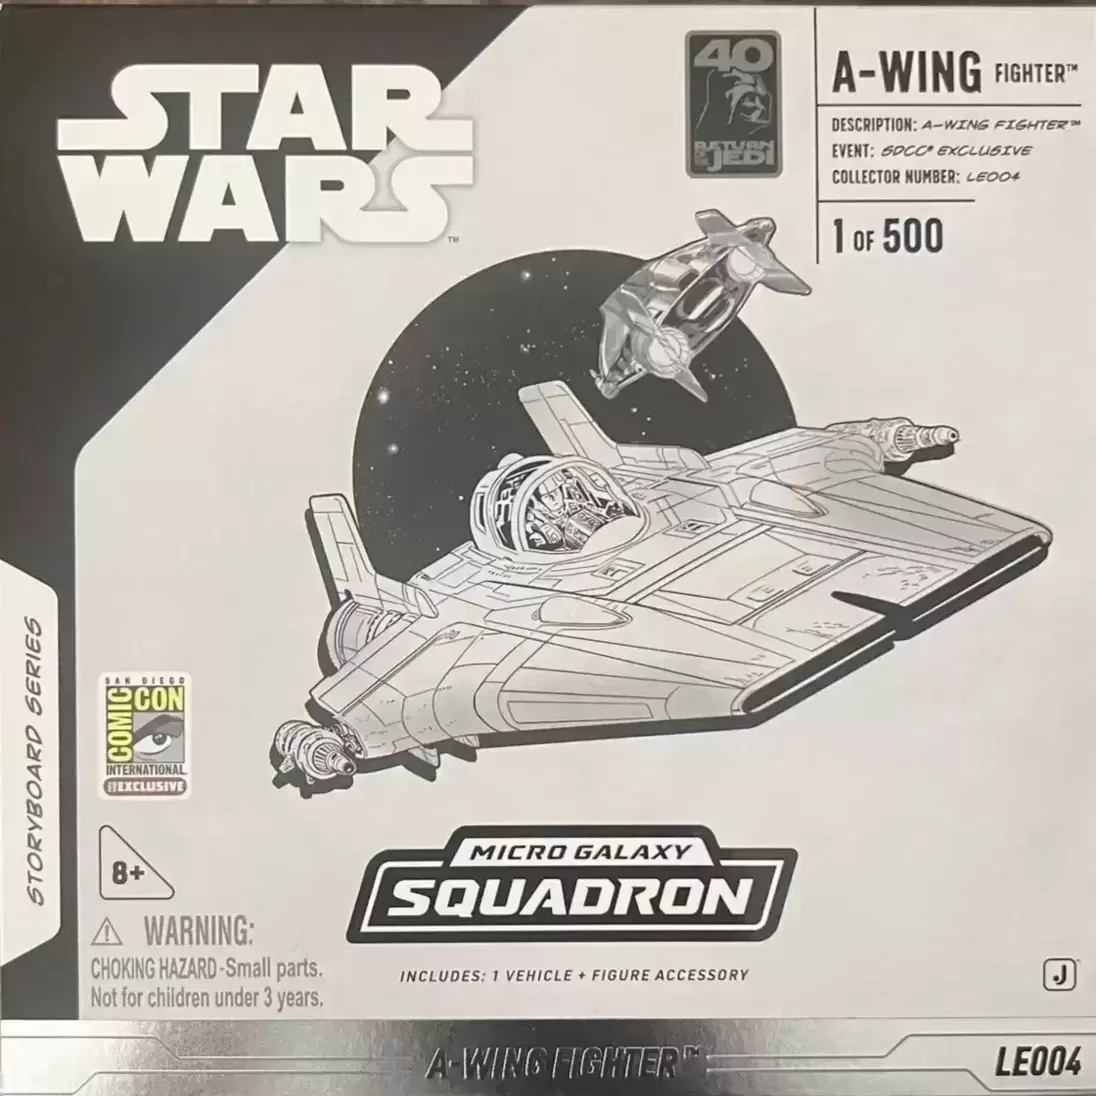 Micro Galaxy Squadron - A-Wing Fighter